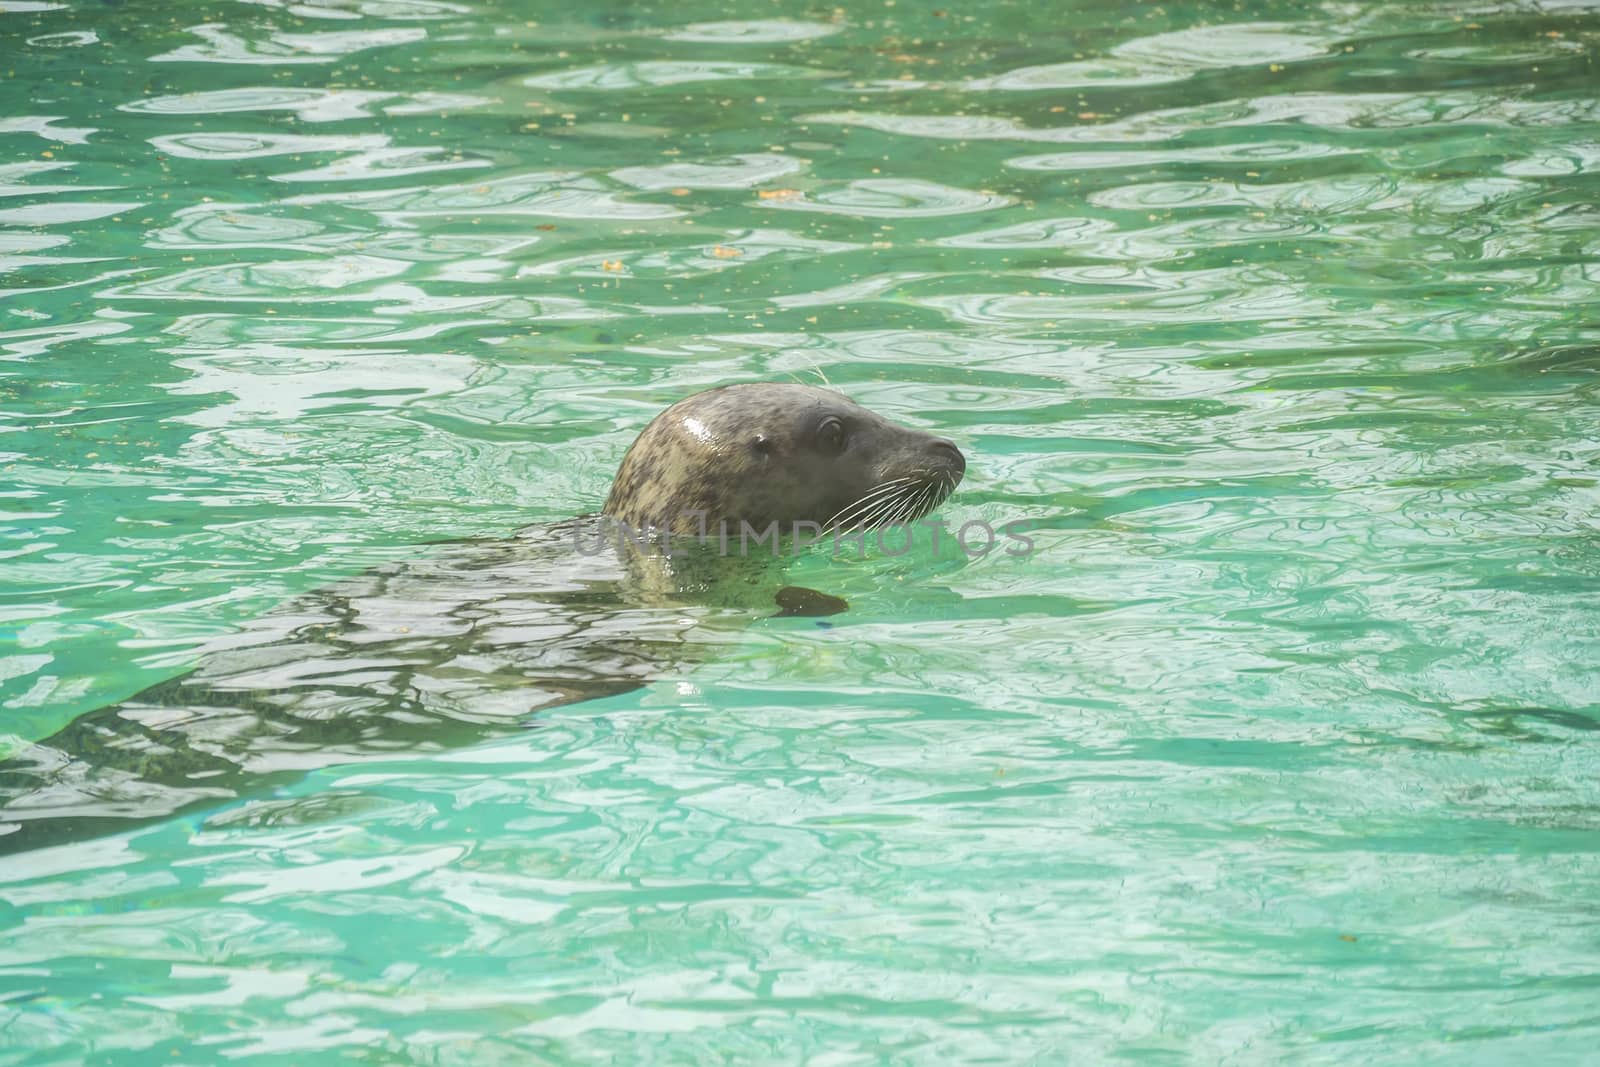 Seal in water with head protruding by max8xam